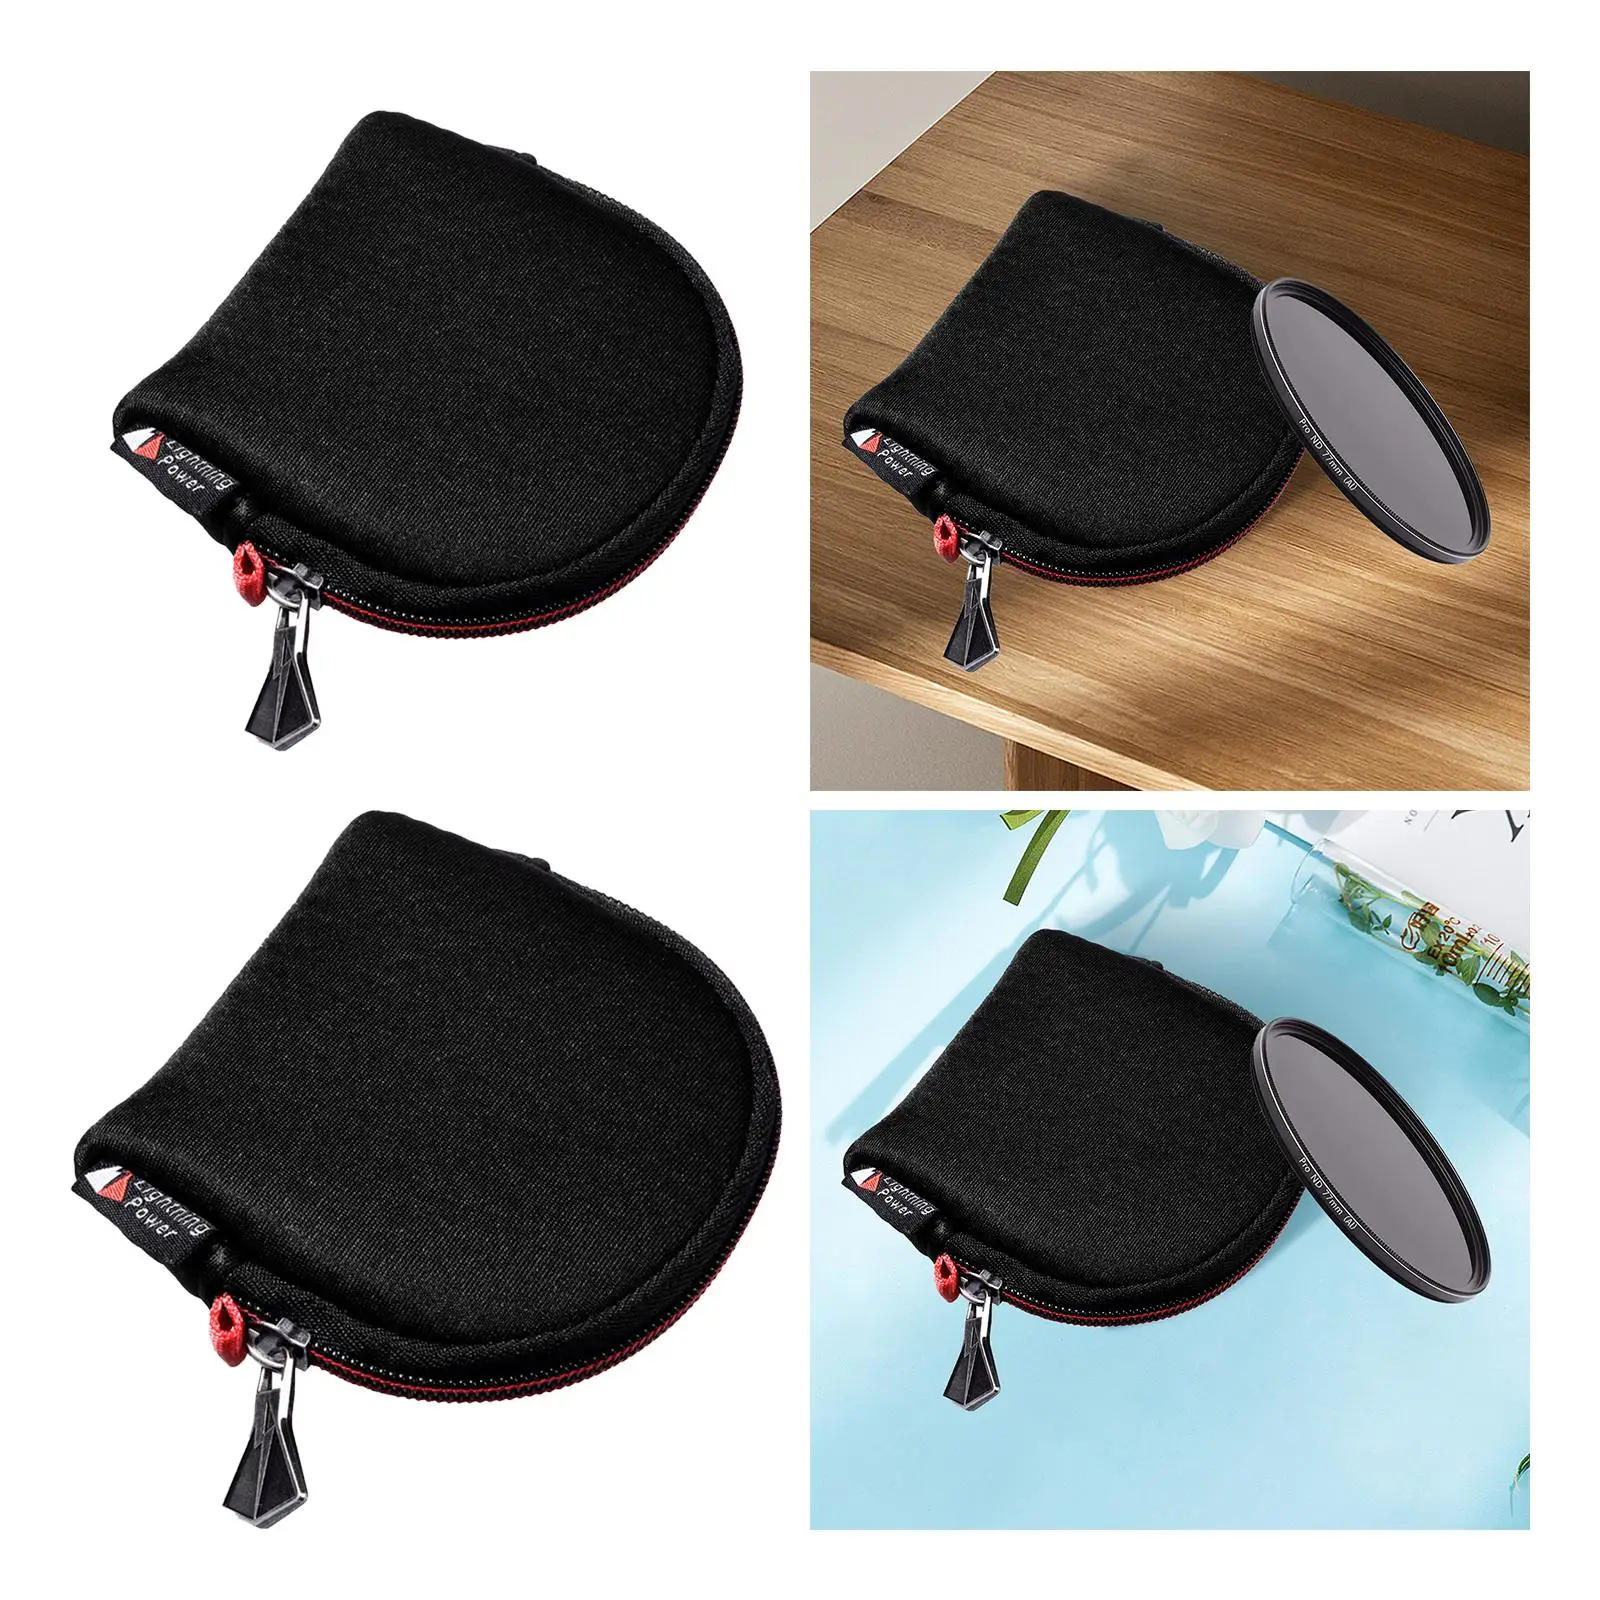 Lens Filter Case Wallet Portable Soft Padded Photography Accessories with Compartment Shockproof Waterproof Filter Carrying Case